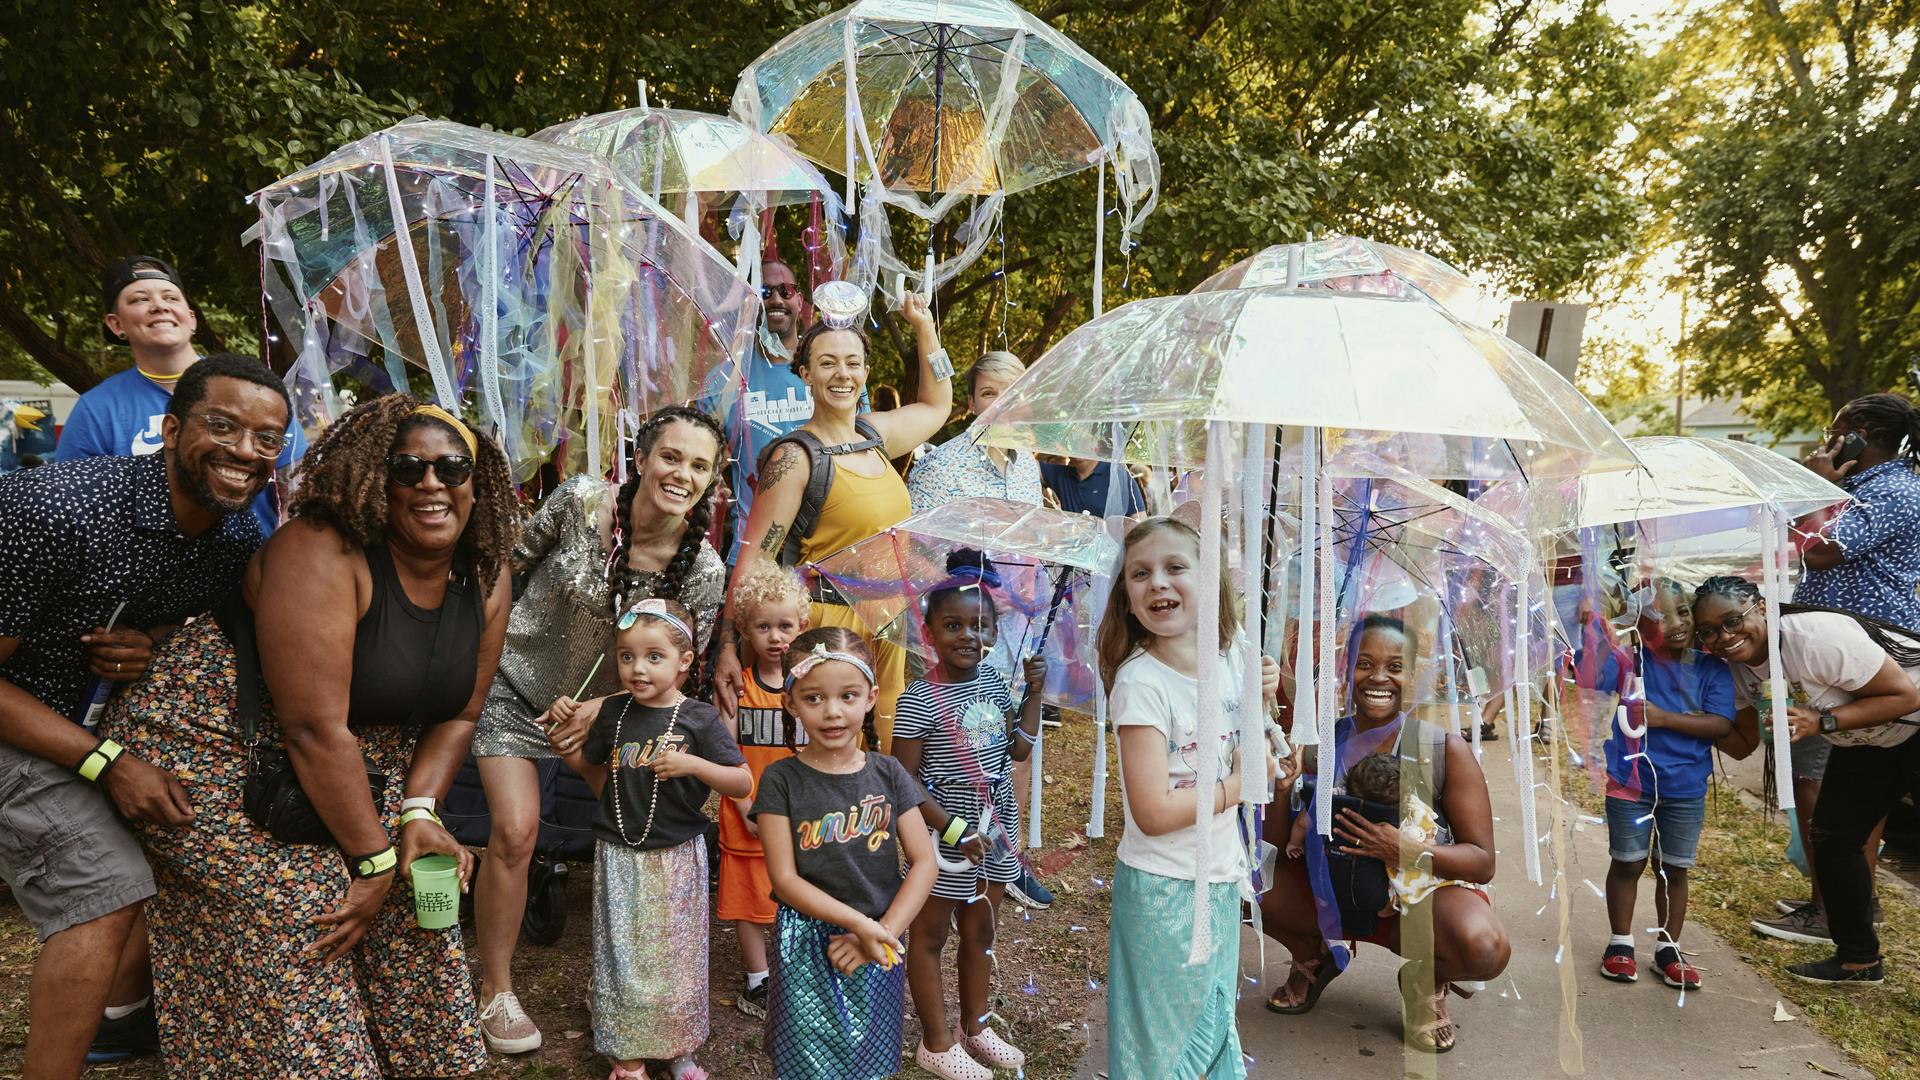 Children and their parents pose, smiling, laughing, and holding colorful parasols.